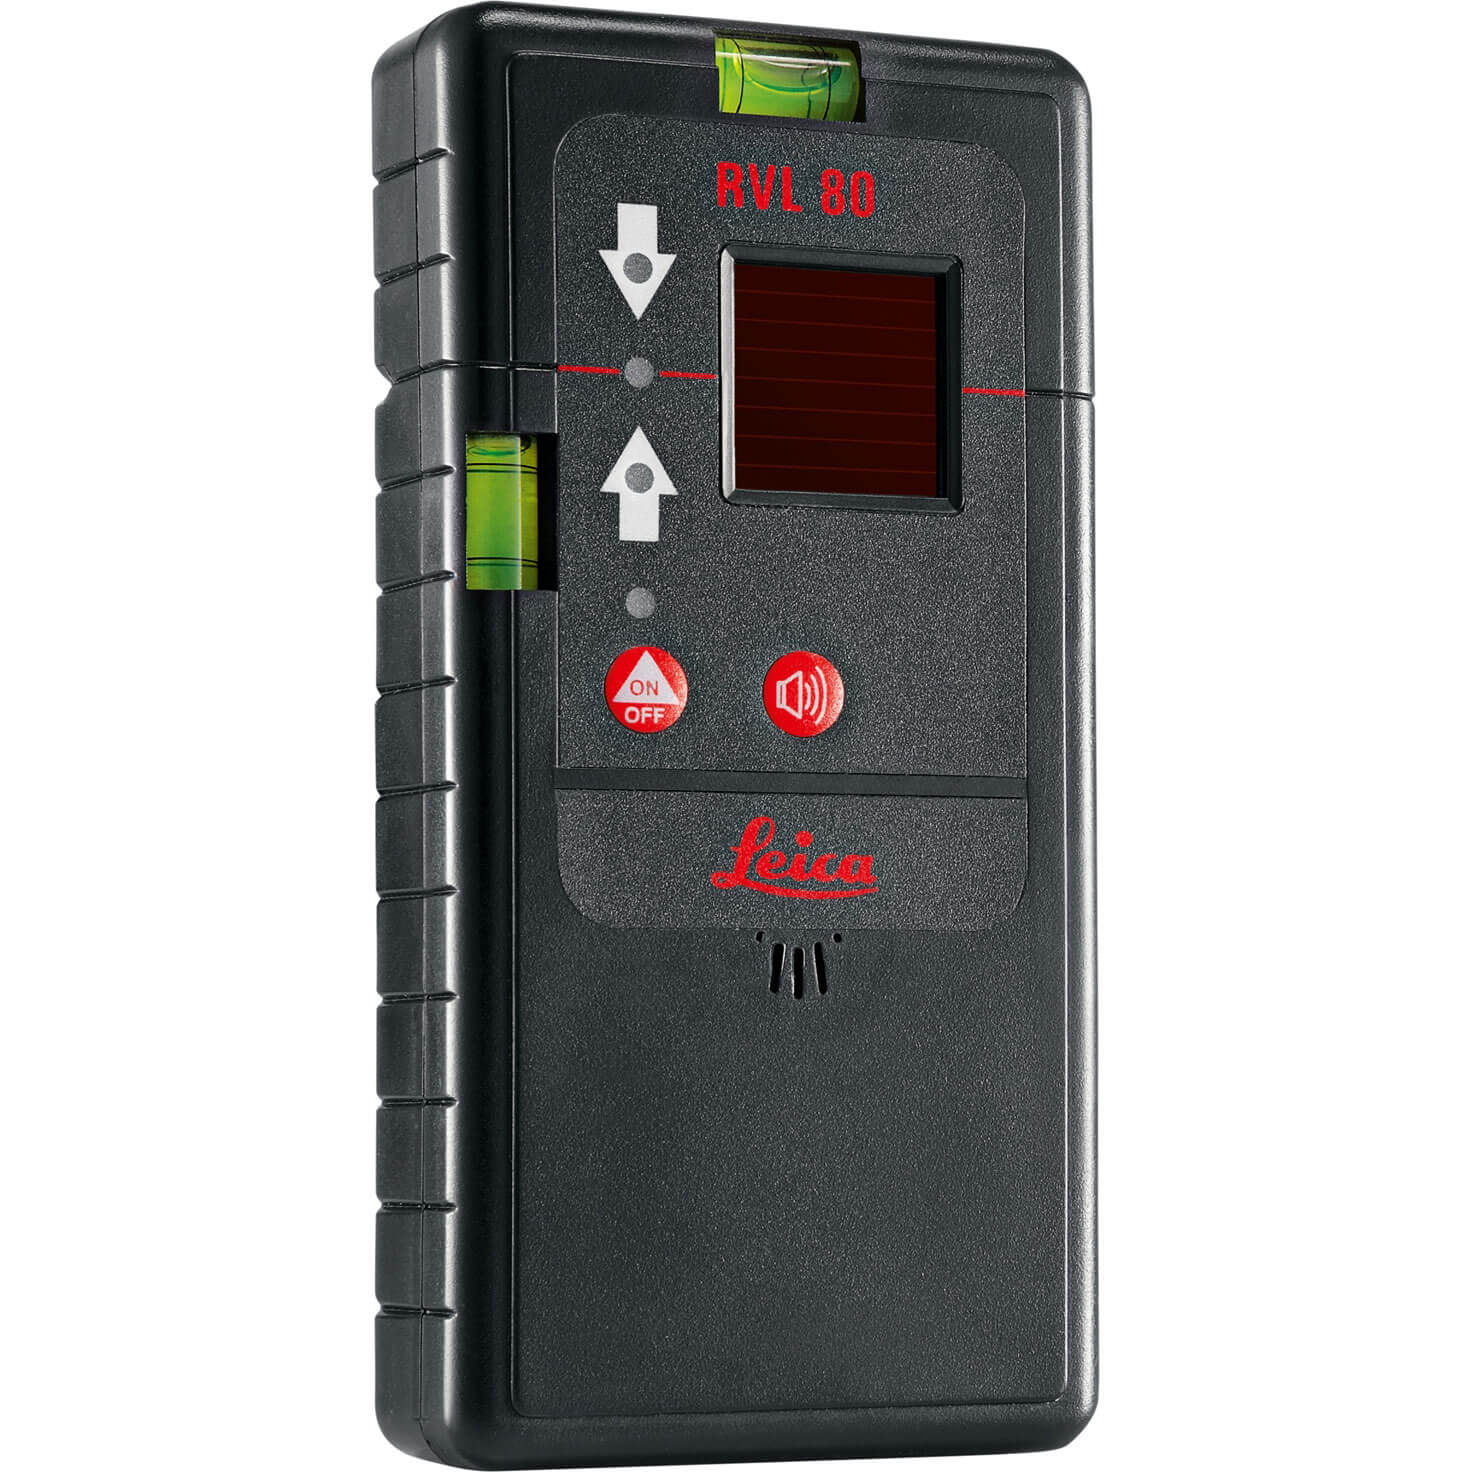 Photos - Other for Construction Leica Geosystems RVL 80 Line Receiver for Lino Laser Level 